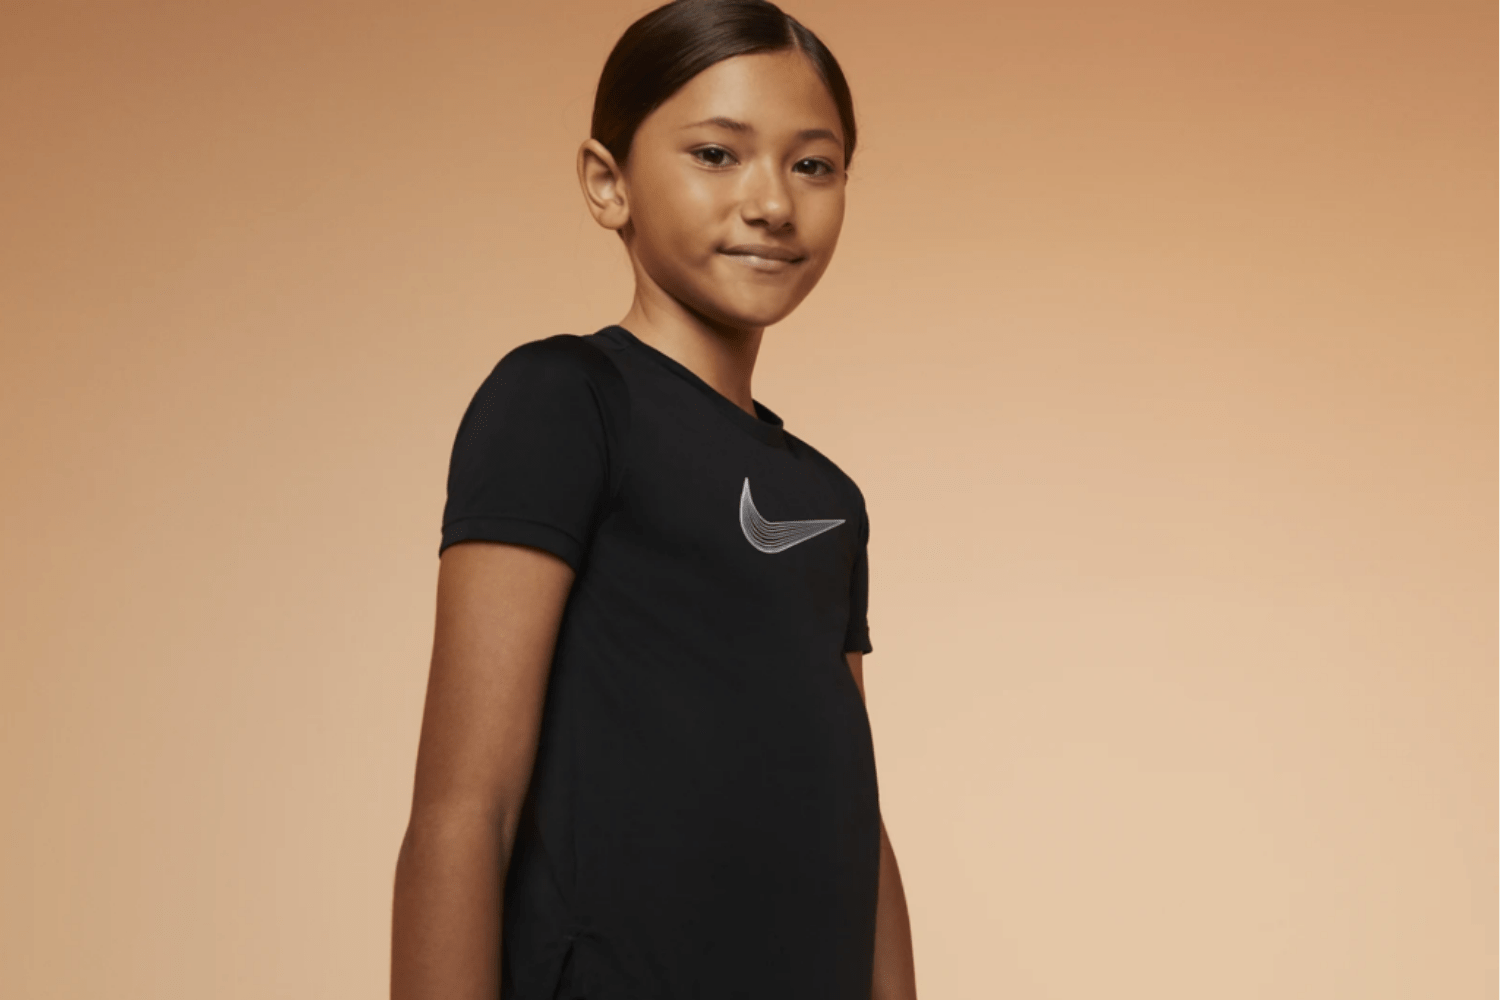 Don't miss the new Nike Teen Girls collection